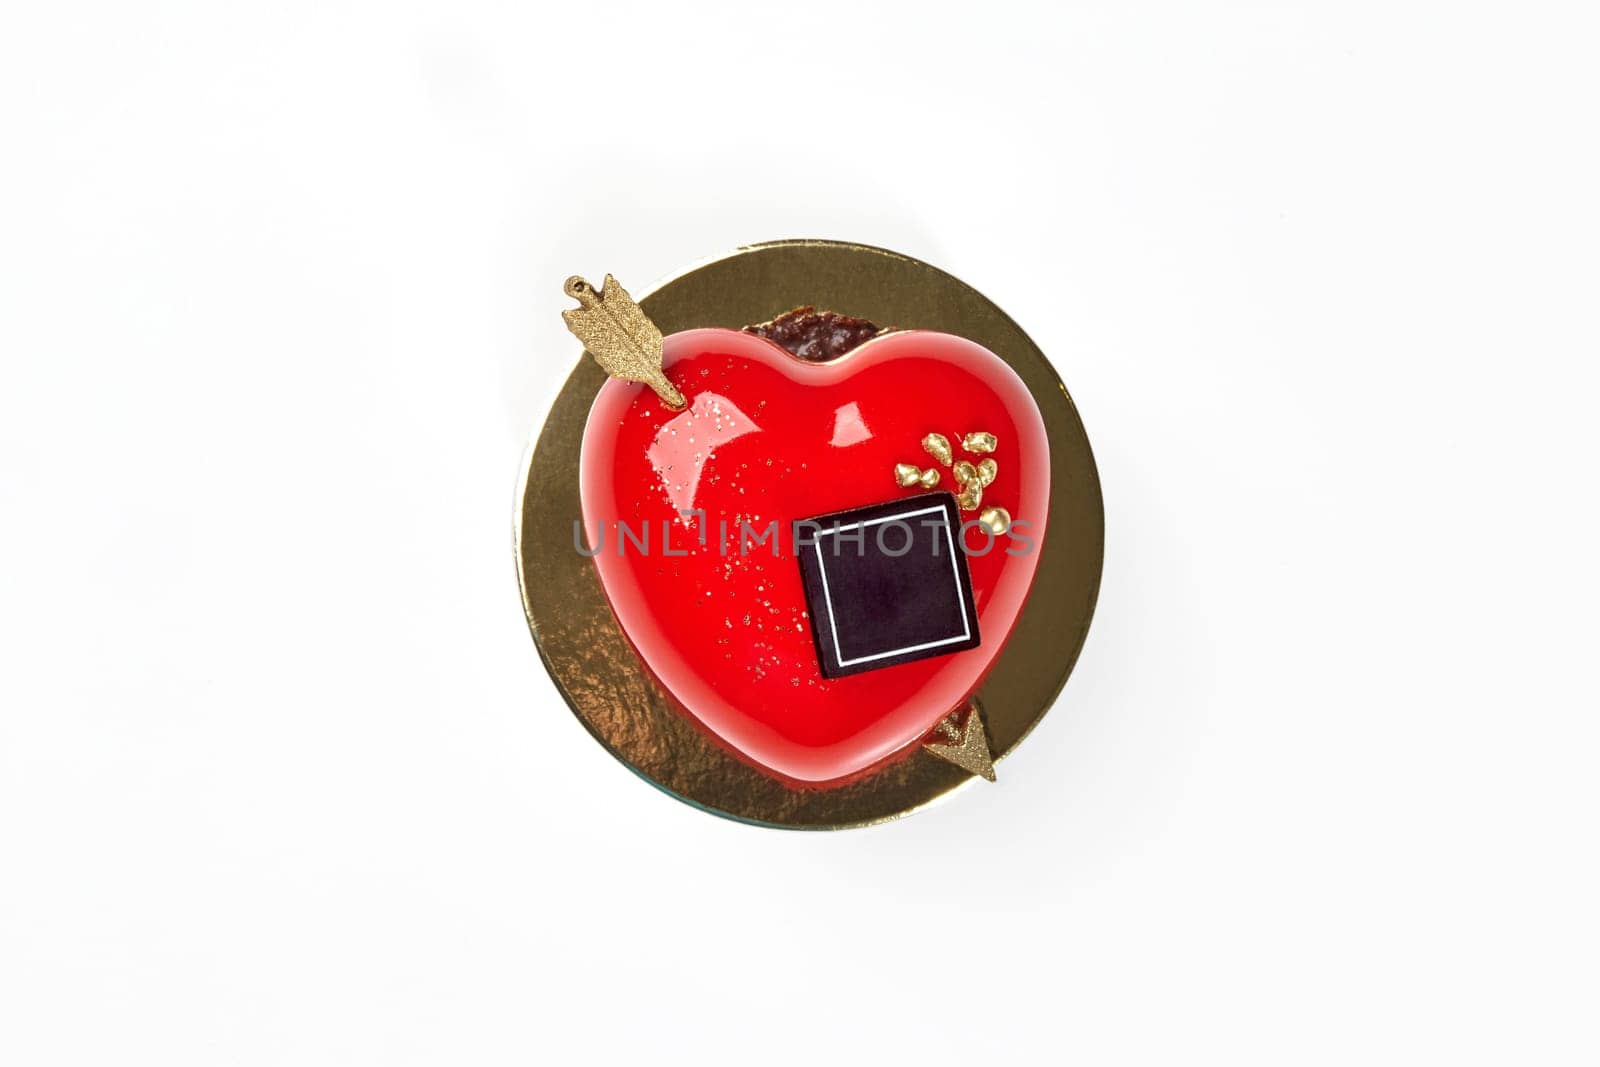 Vibrant red heart-shaped strawberry mousse cake with glossy icing, chocolate and gold arrow, perfect for celebrations of love and affection on Valentines Day, top view against white background